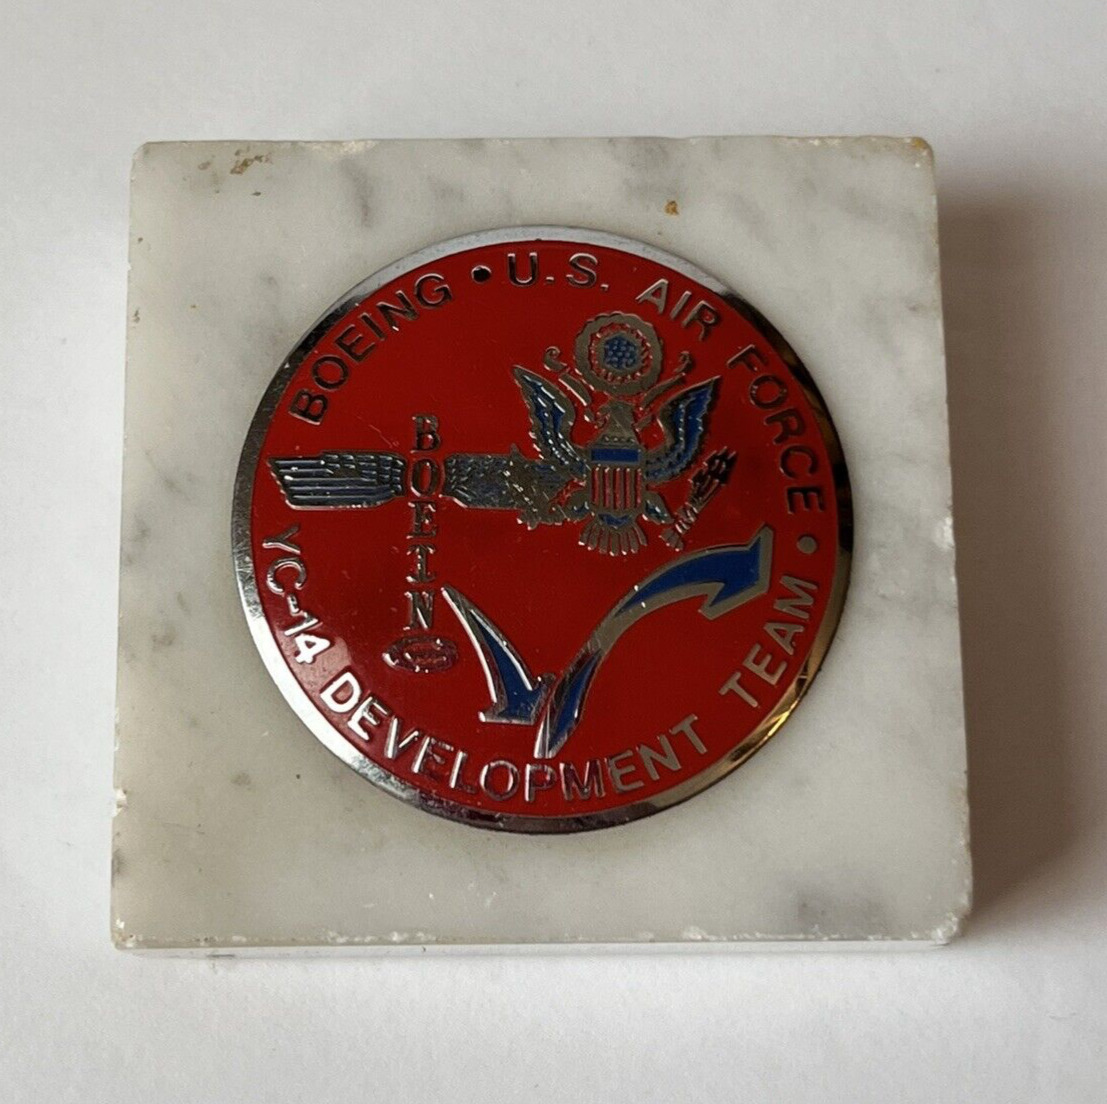 YC-14 Boeing USAF United States Air Force Rollout June 76 Medallion Paperweight